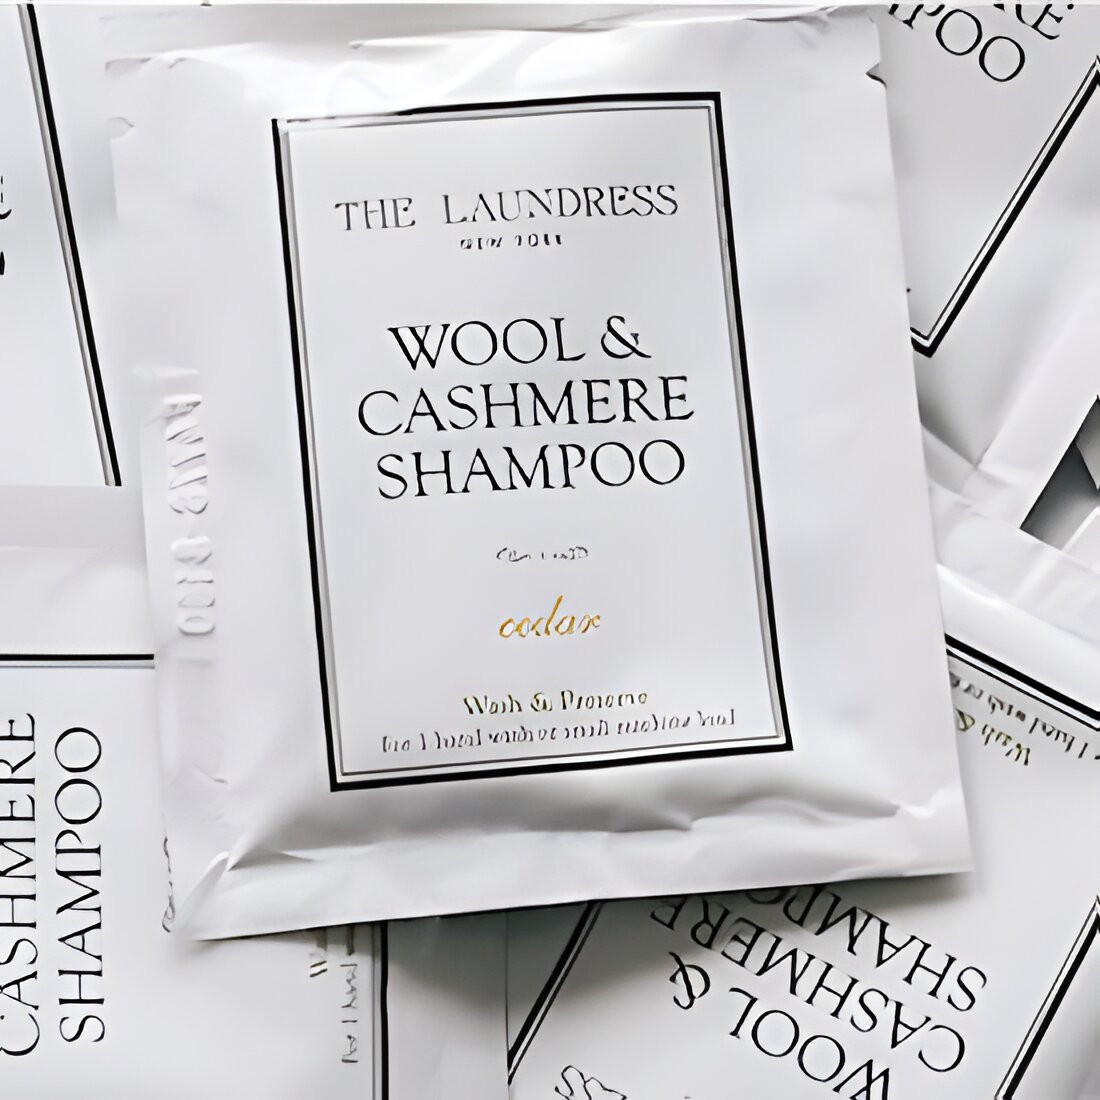 Free Wool And Cashmere Shampoo For Laundry